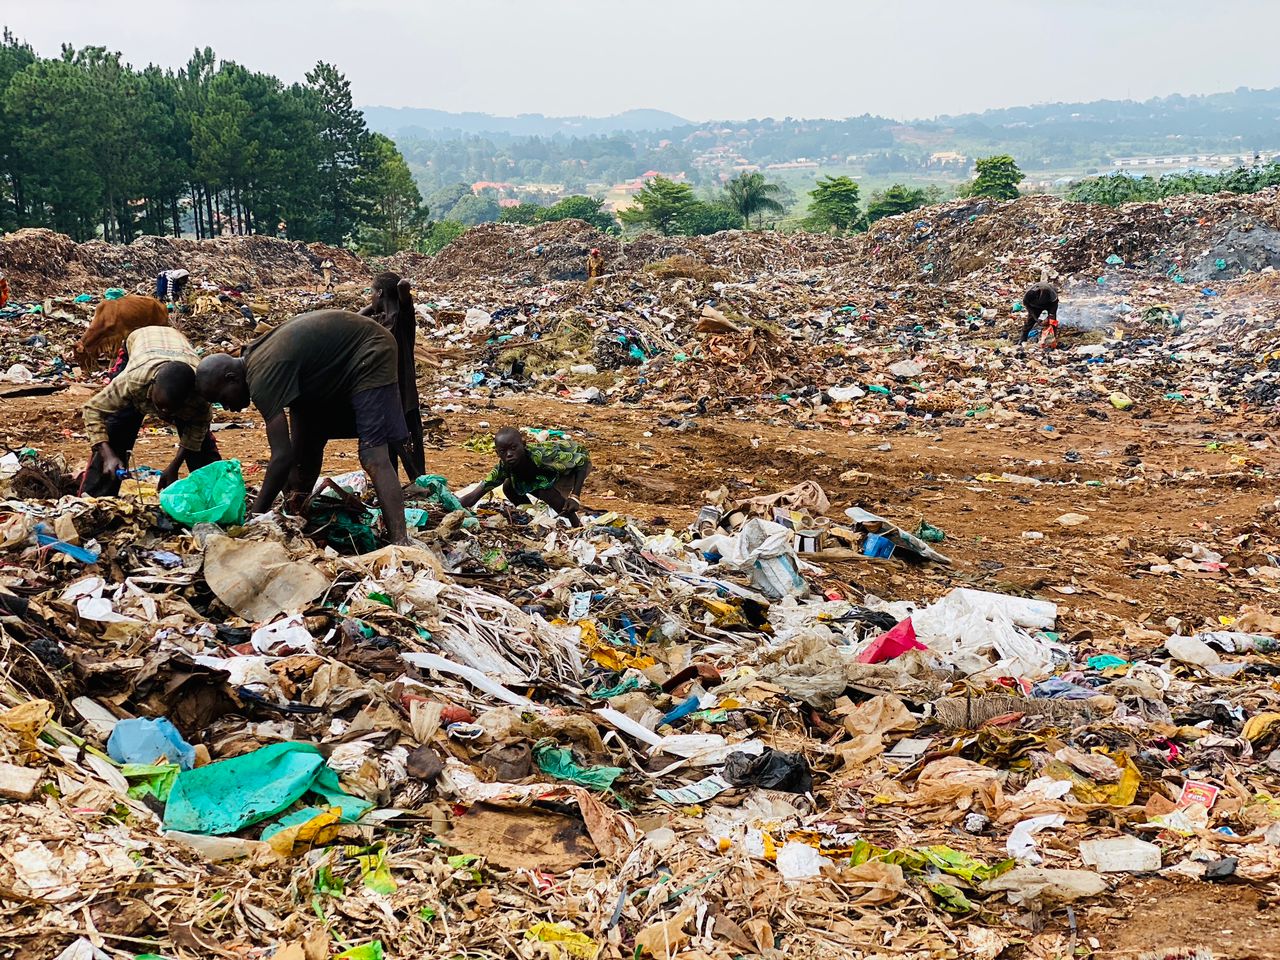 A group of street connected children are looking through a large heap of rubbish for plastic bottles.